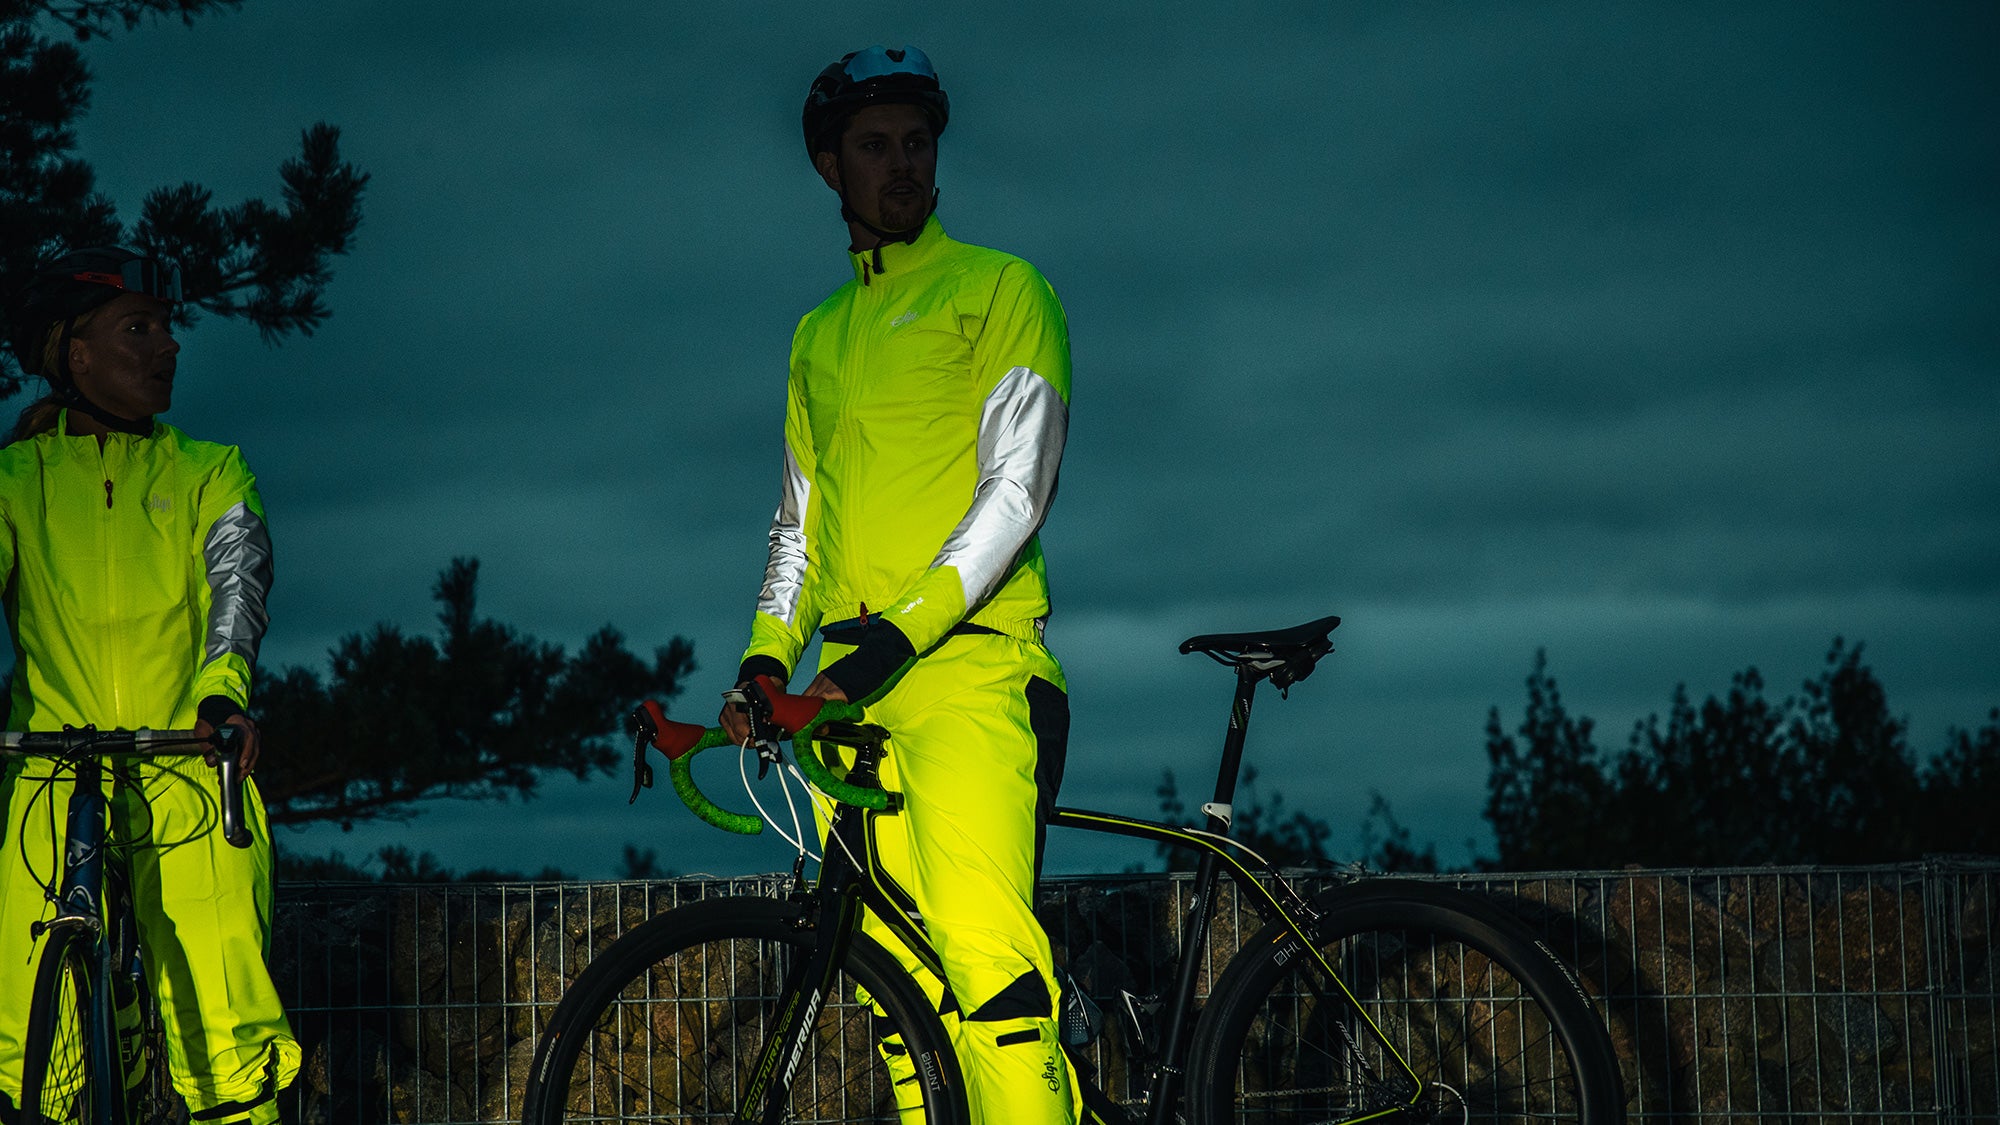 Cycling in the dark? - Use Biomotion for increased visibility